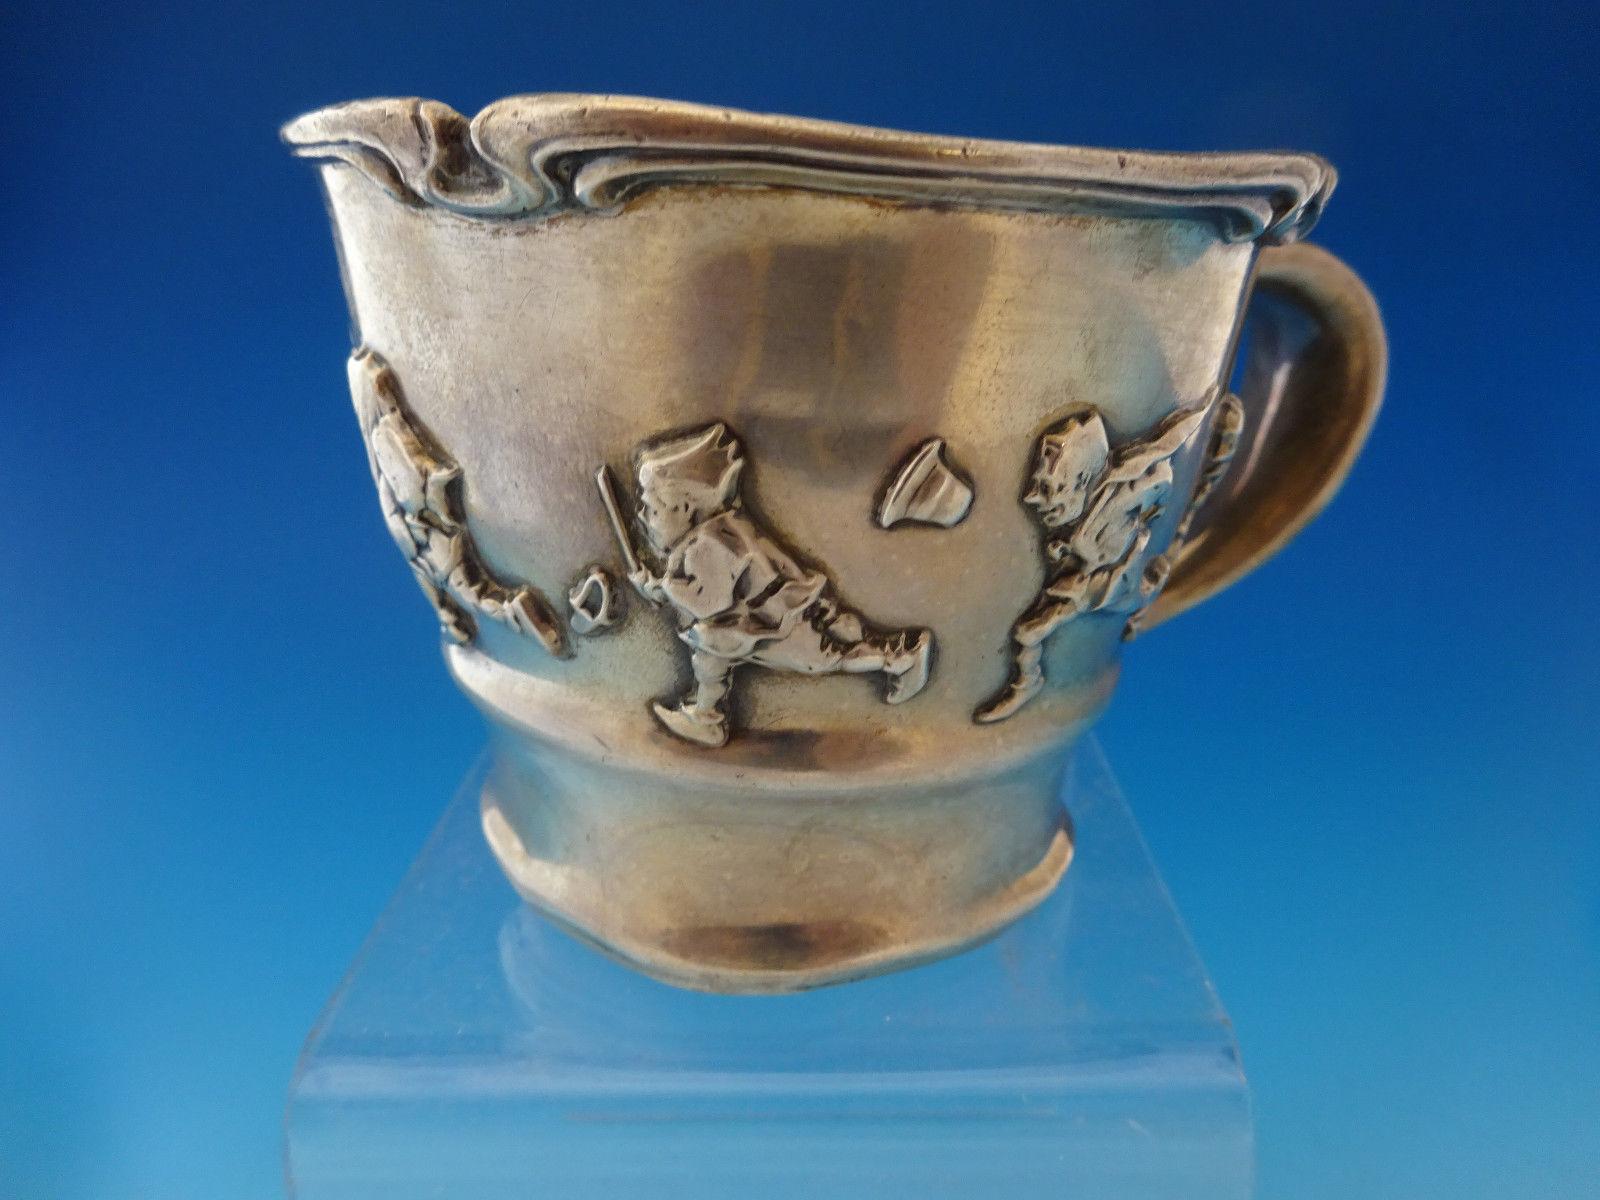 Shop Categories Helpful Links Gorham Old King Cole sterling silver child's cup GW 2 3/4 as-is with some dents

Sterling silver childs cup Gorham sterling silver child's cup with fabulous applied Old King Cole and fiddlers in the theme of the nursery